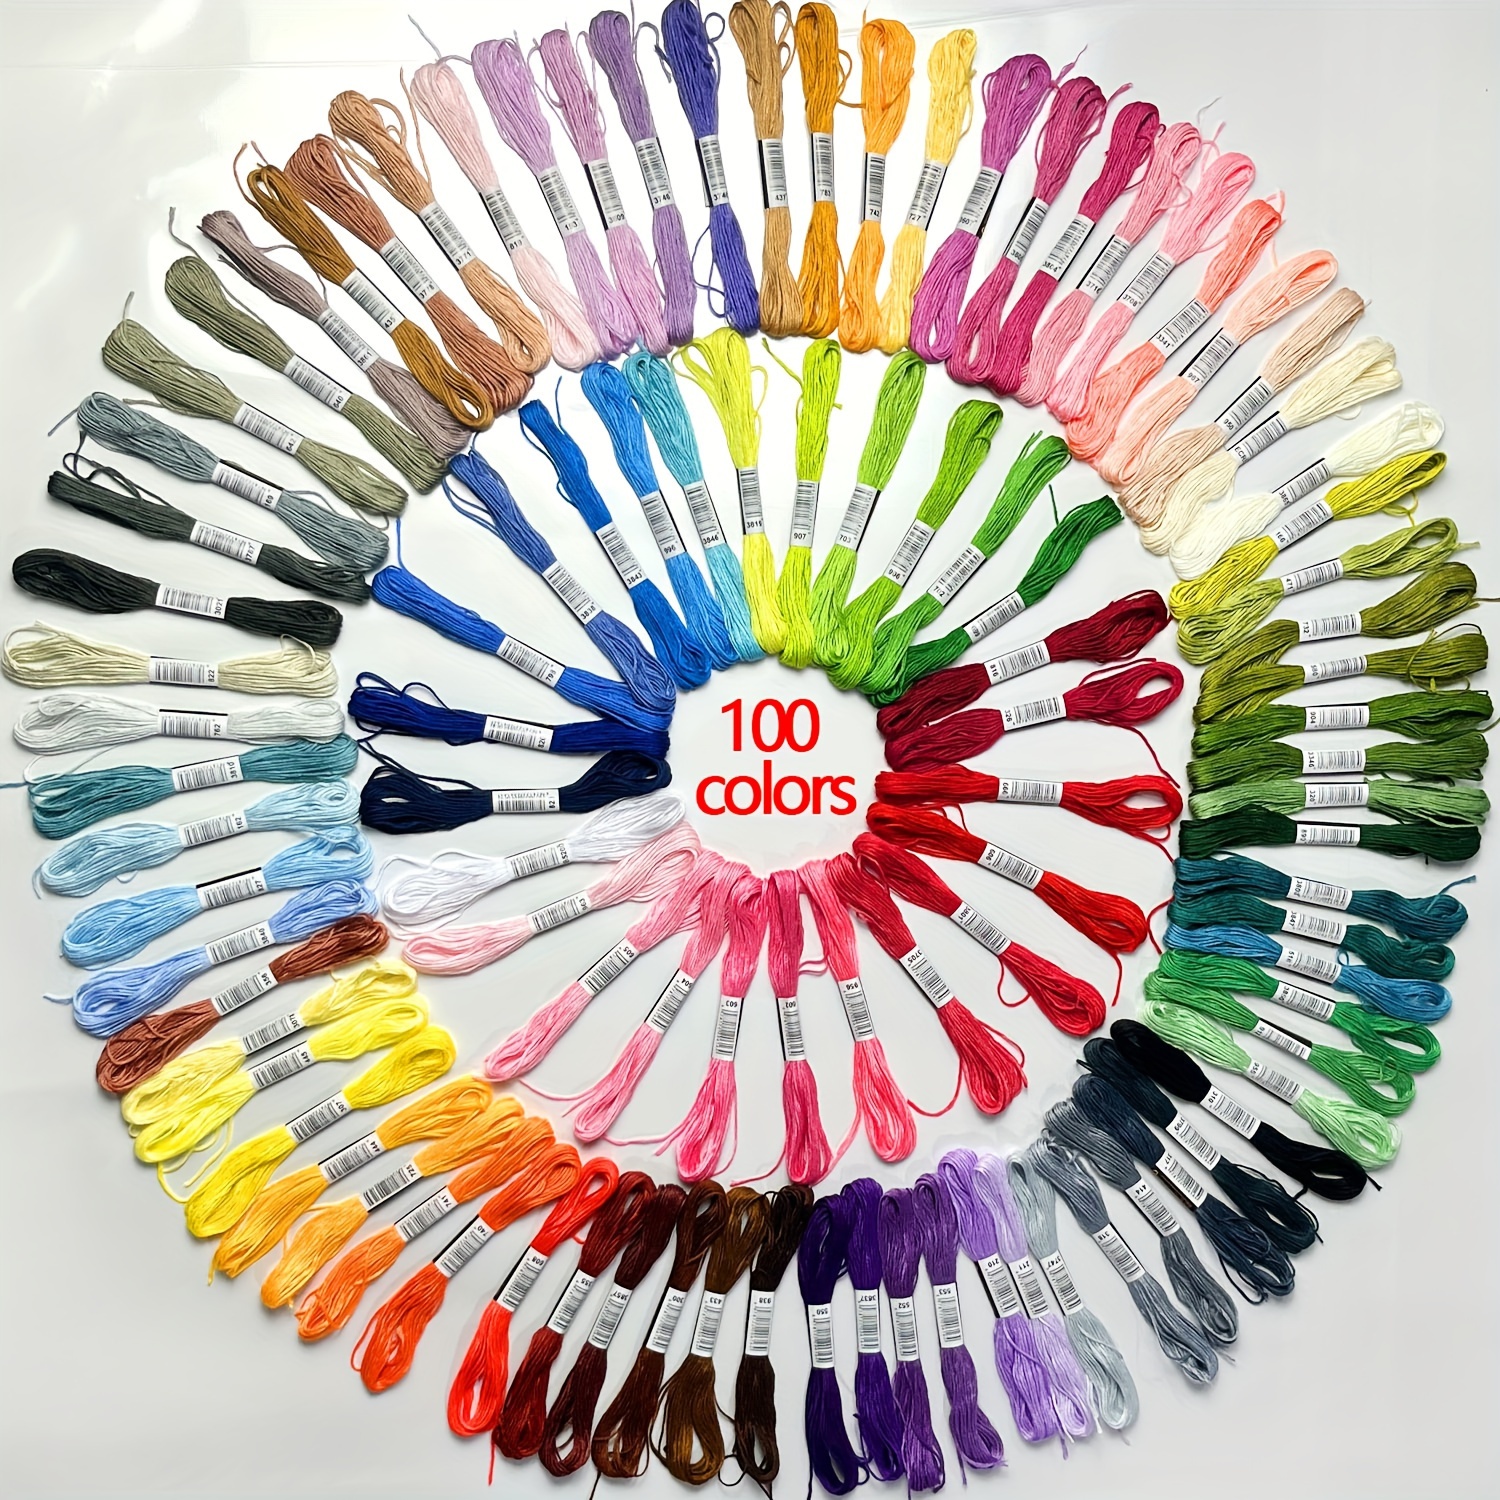 

24/50/100/447 Colors Premium Embroidery Floss Set, Polyester Cotton Blend, Smooth Durable Craft Thread For Cross-stitch, Sewing, Diy Handicrafts, Friendship Bracelets - Assorted Color Pack